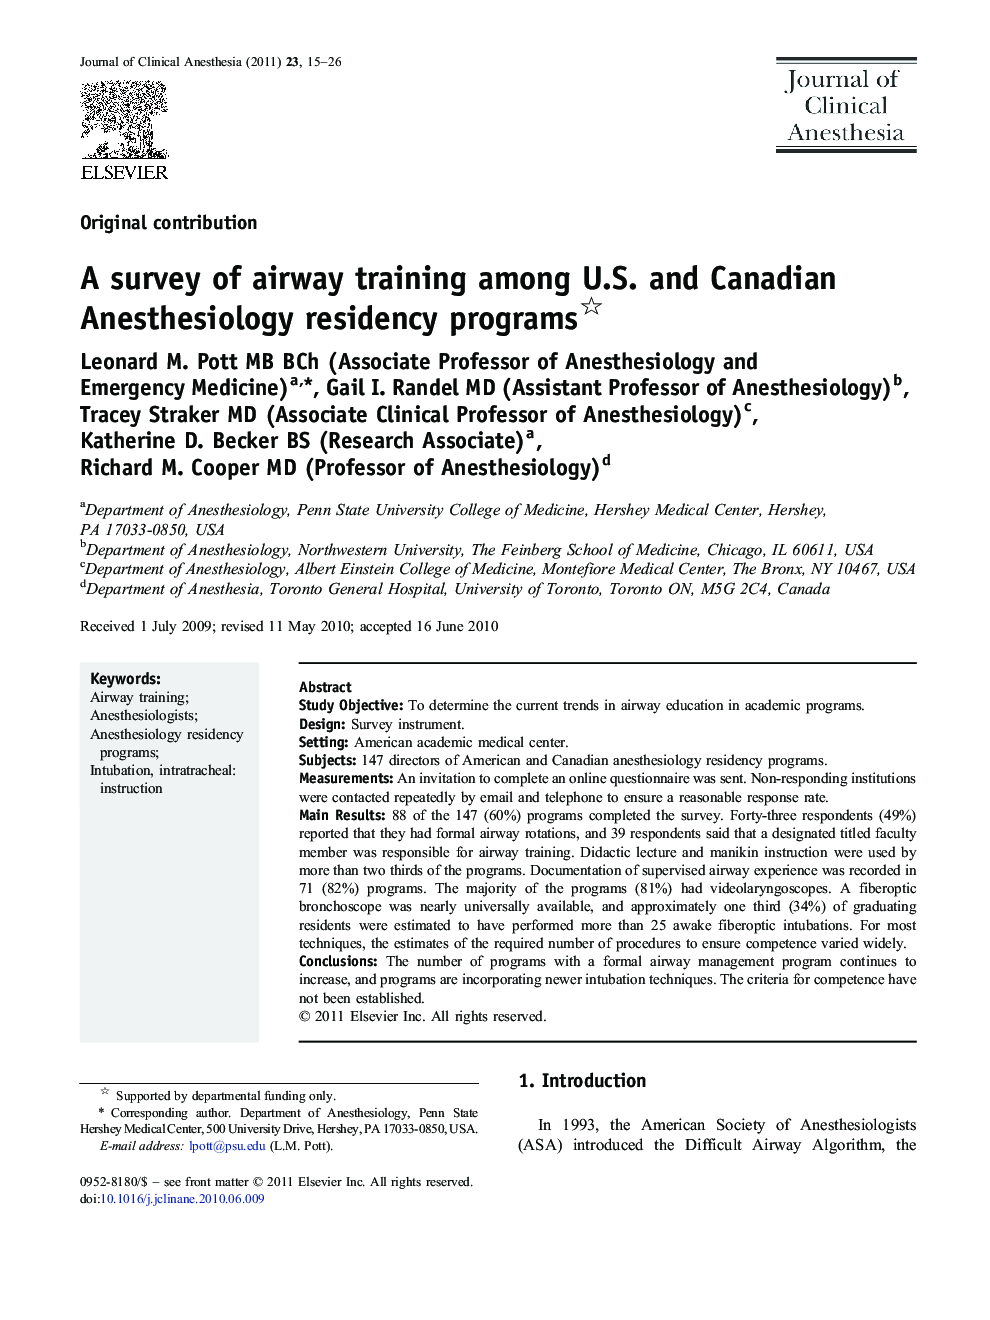 A survey of airway training among U.S. and Canadian Anesthesiology residency programs 